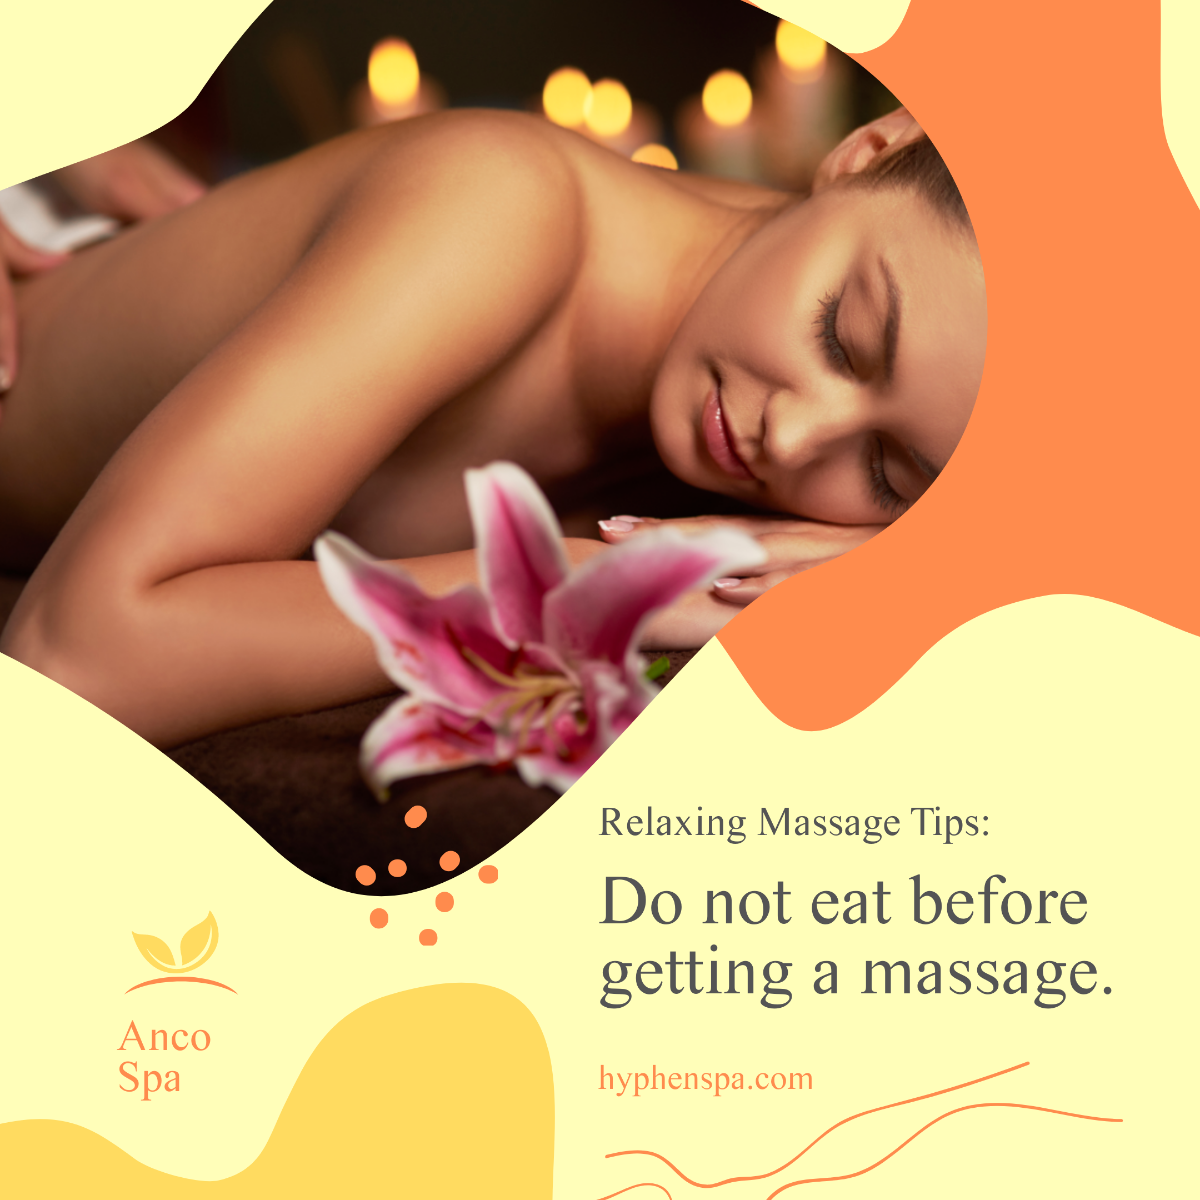 Relaxing Massage Tips And Tricks Post, Instagram, Facebook